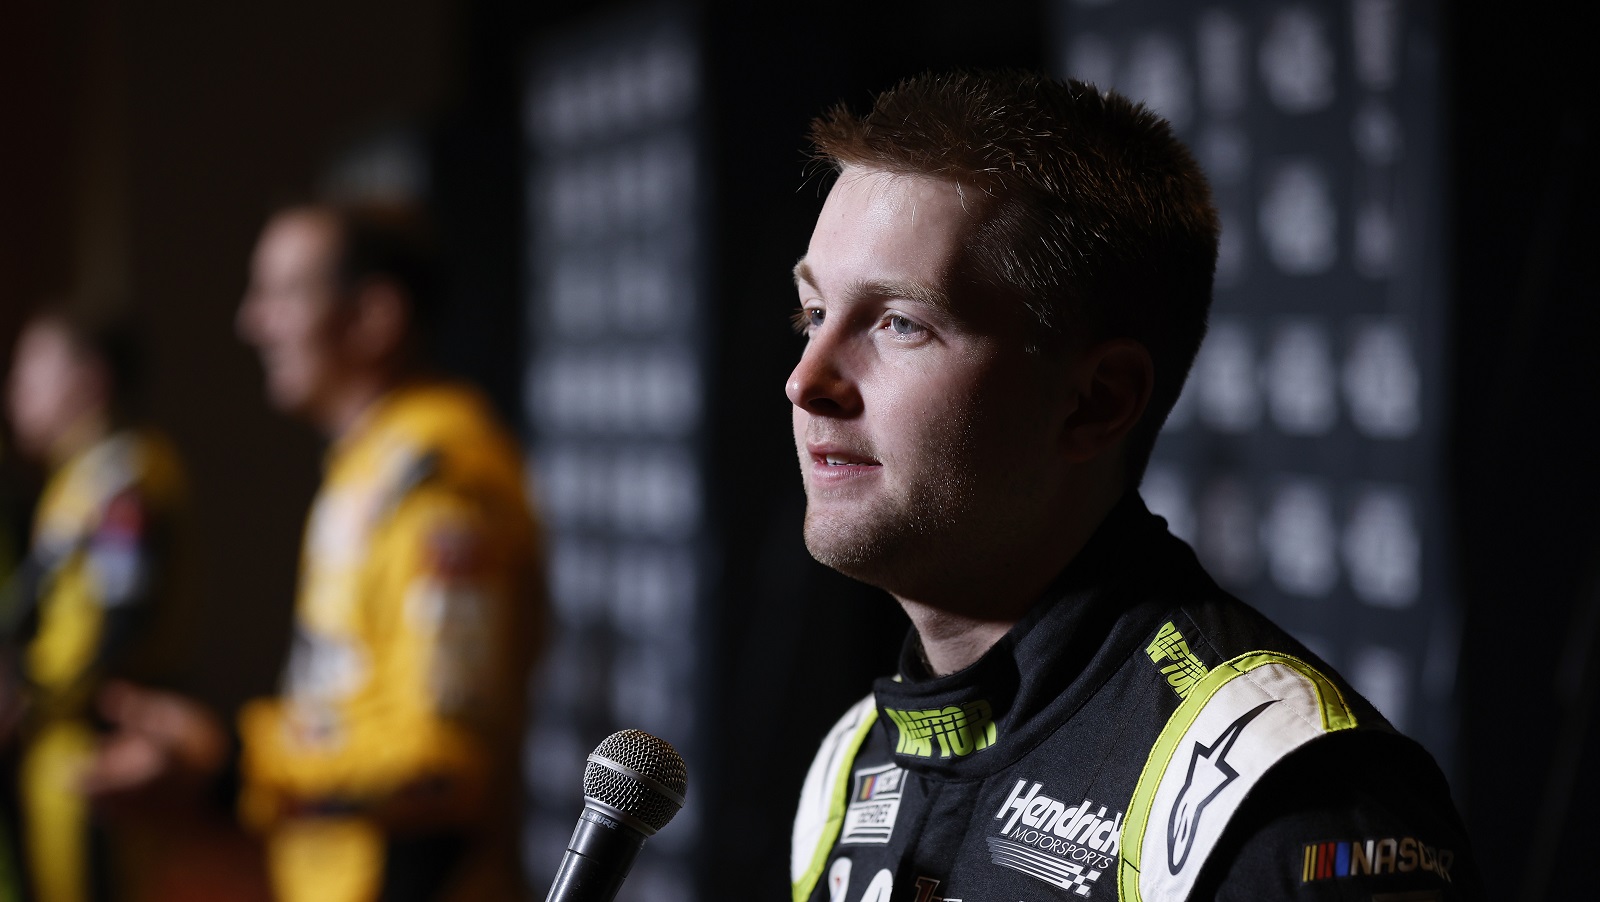 NASCAR driver William Byron speaks with reporters during the NASCAR Cup Series Playoff Media Day at Charlotte Convention Center on Sept. 1, 2022.